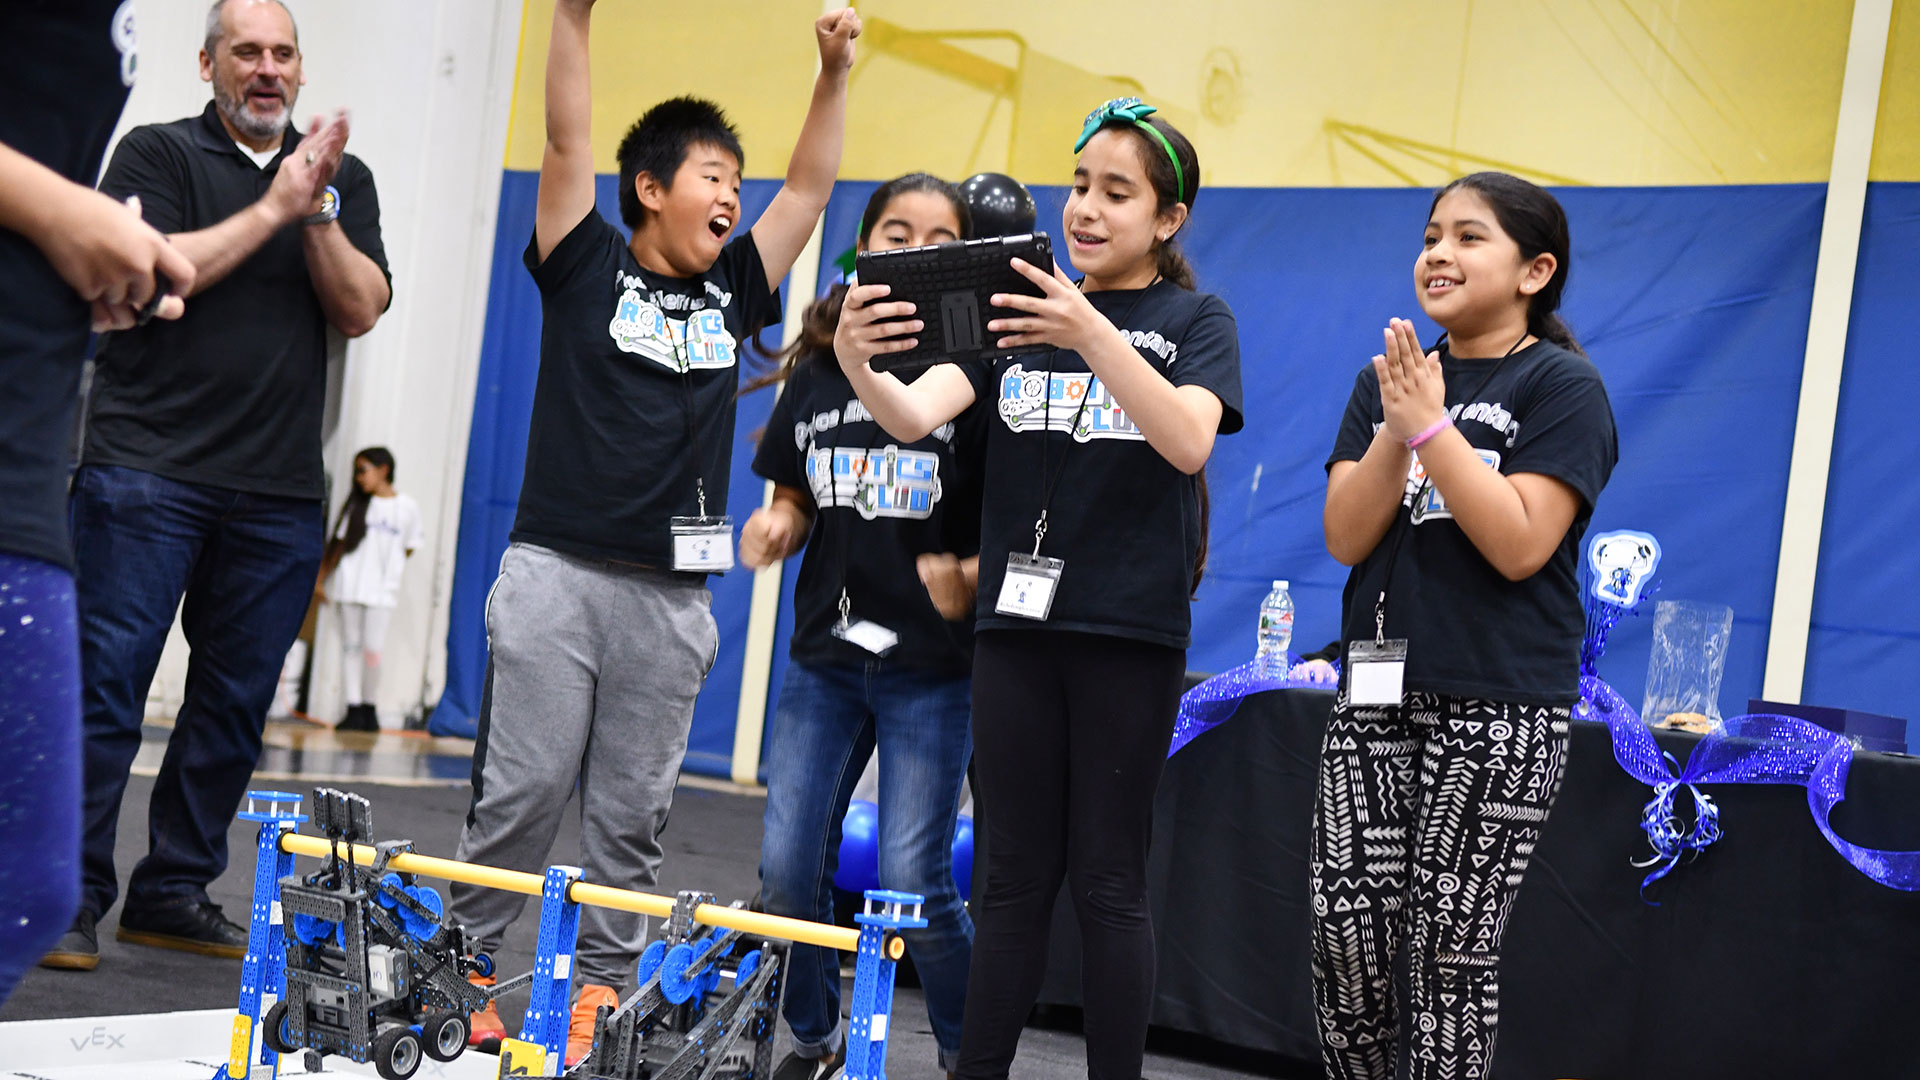 You are Invited to Downey Unified’s Robolympics | April 20